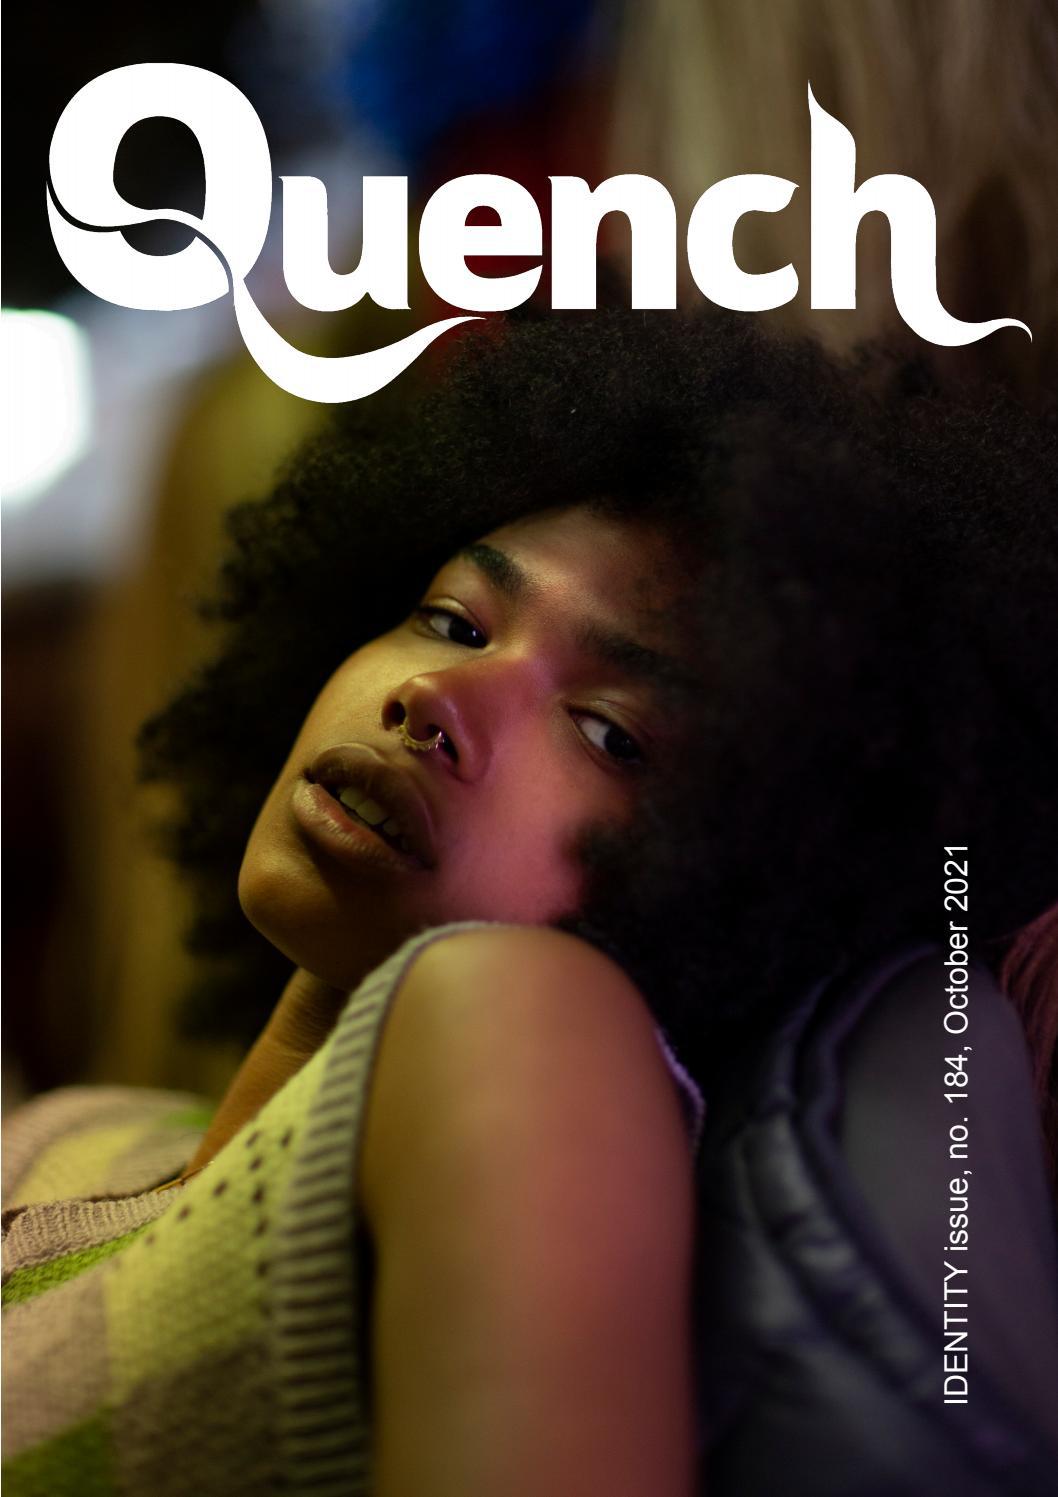 Quench Magazine Issue 184, October 2021